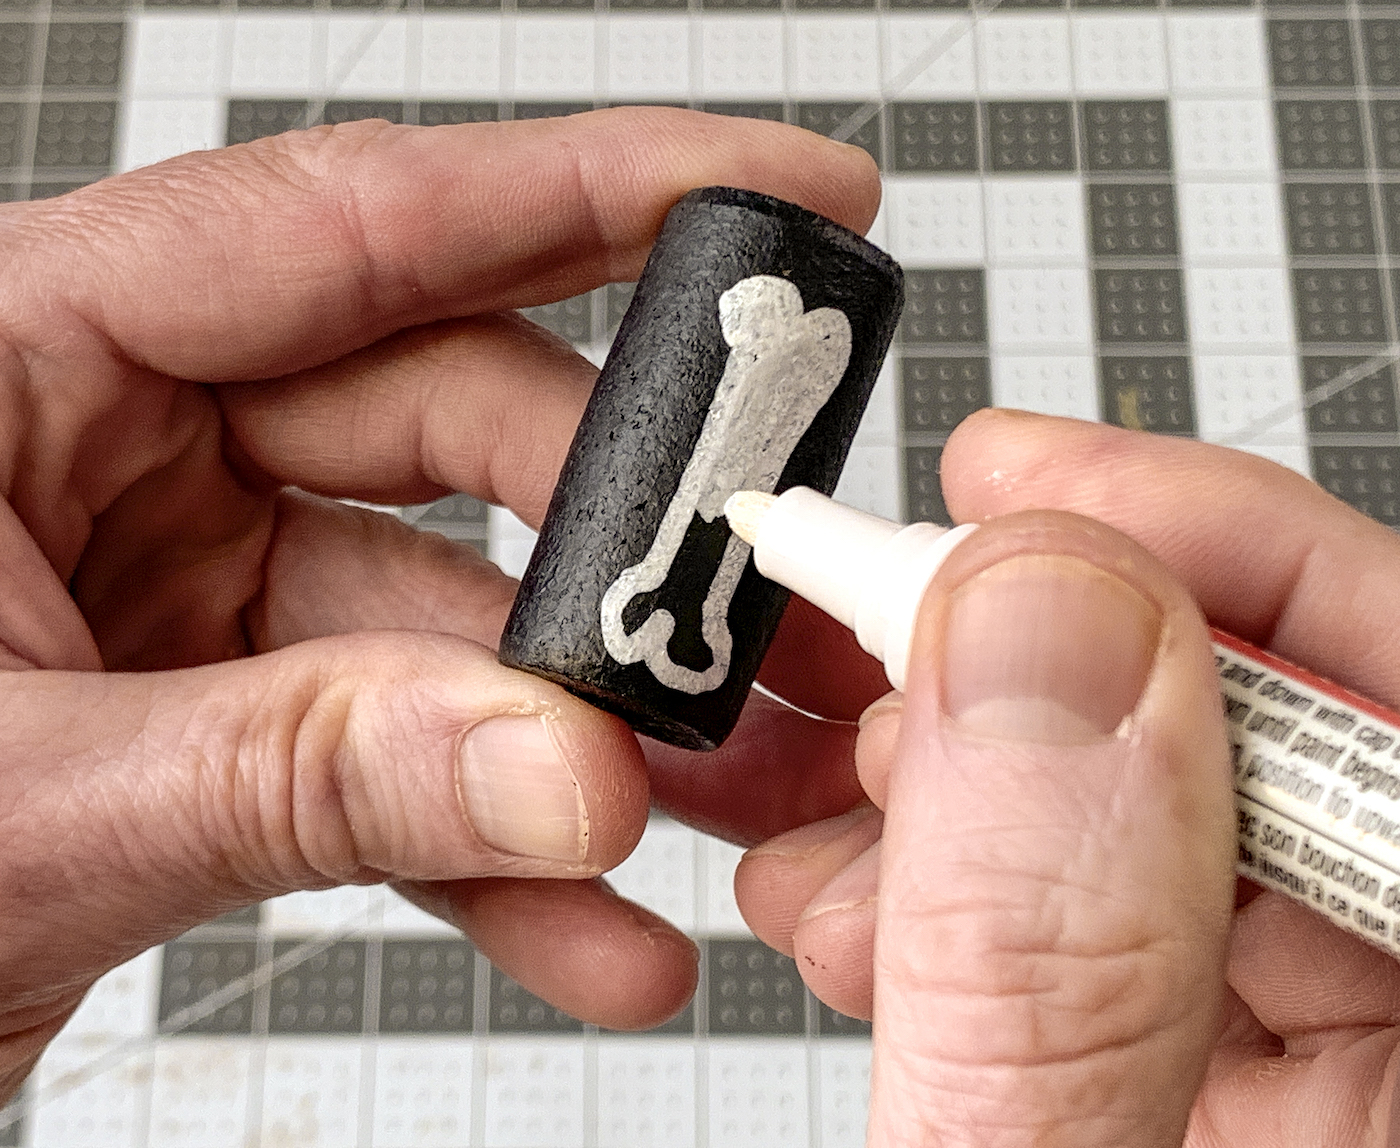 Drawing a bone shape on a black wine cork with a white paint pen